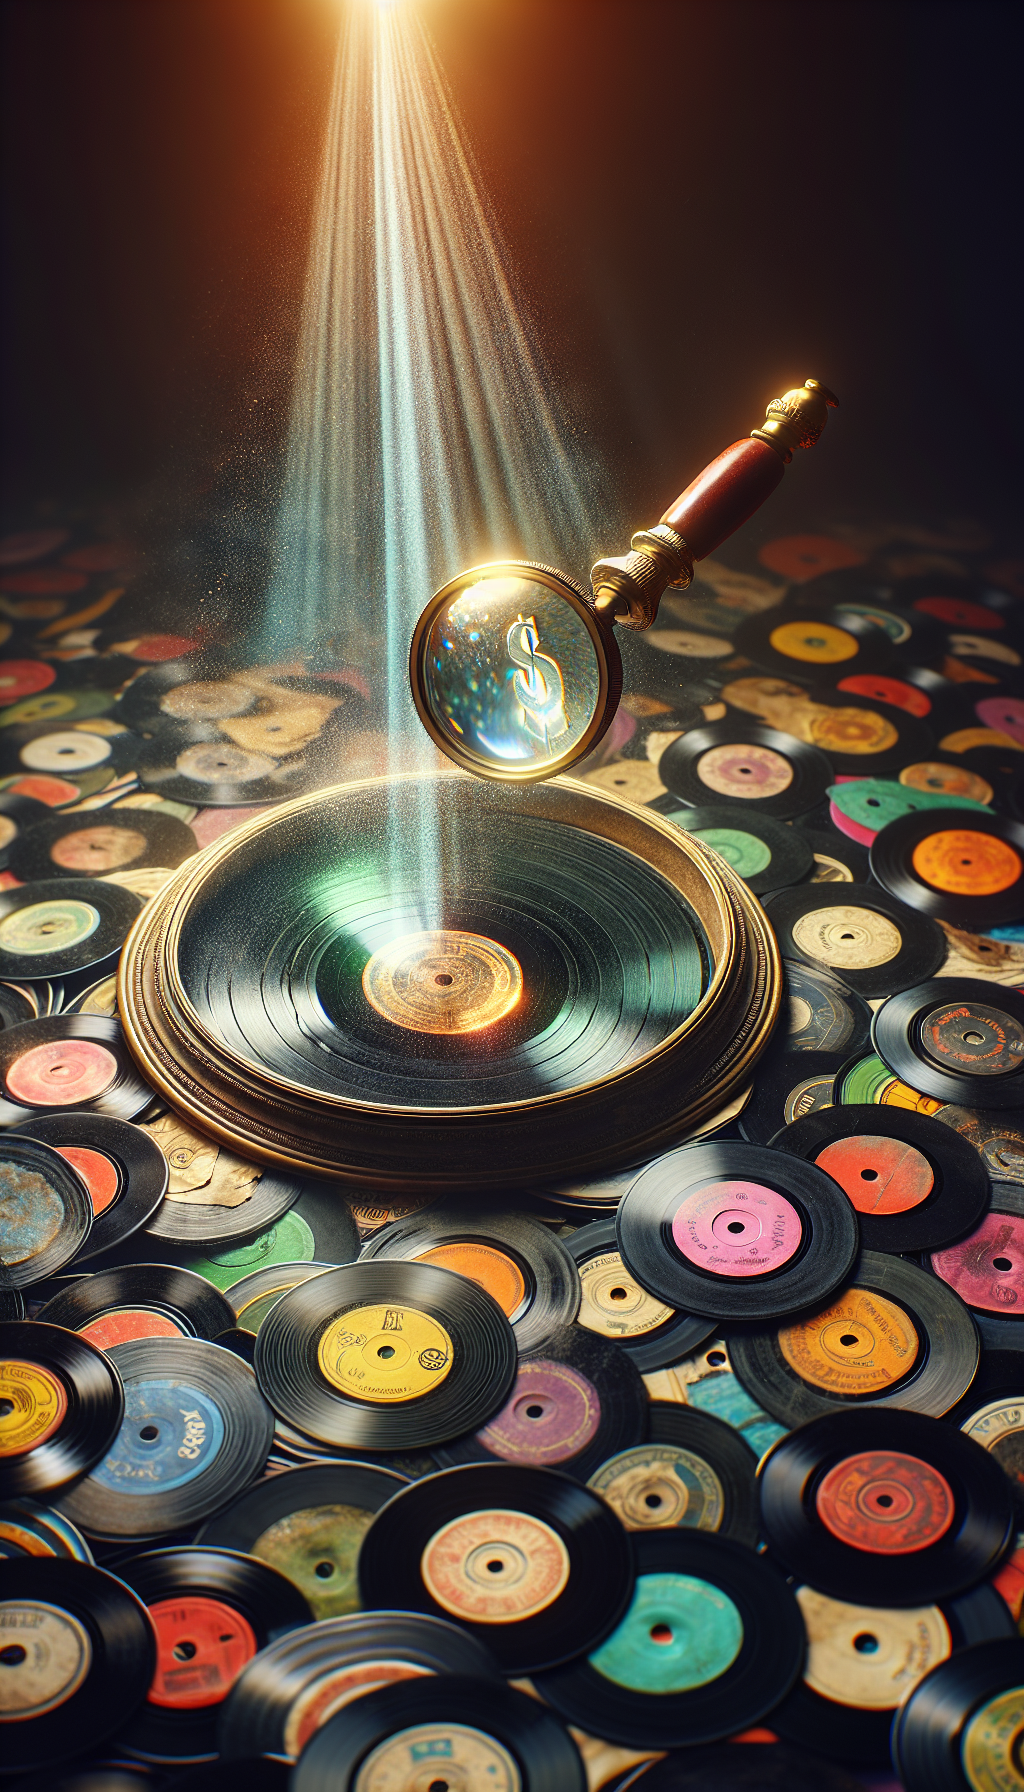 A rustic magnifying glass hovers over a vibrant, scattered array of vinyl records, with light rays shining through to spotlight a gleaming, rare vinyl gem amidst the collection. Dust particles dance in the beam, highlighting the age and value, while small dollar signs etched into the records' surfaces subtly signify the hidden treasures' worth within this musical haystack.